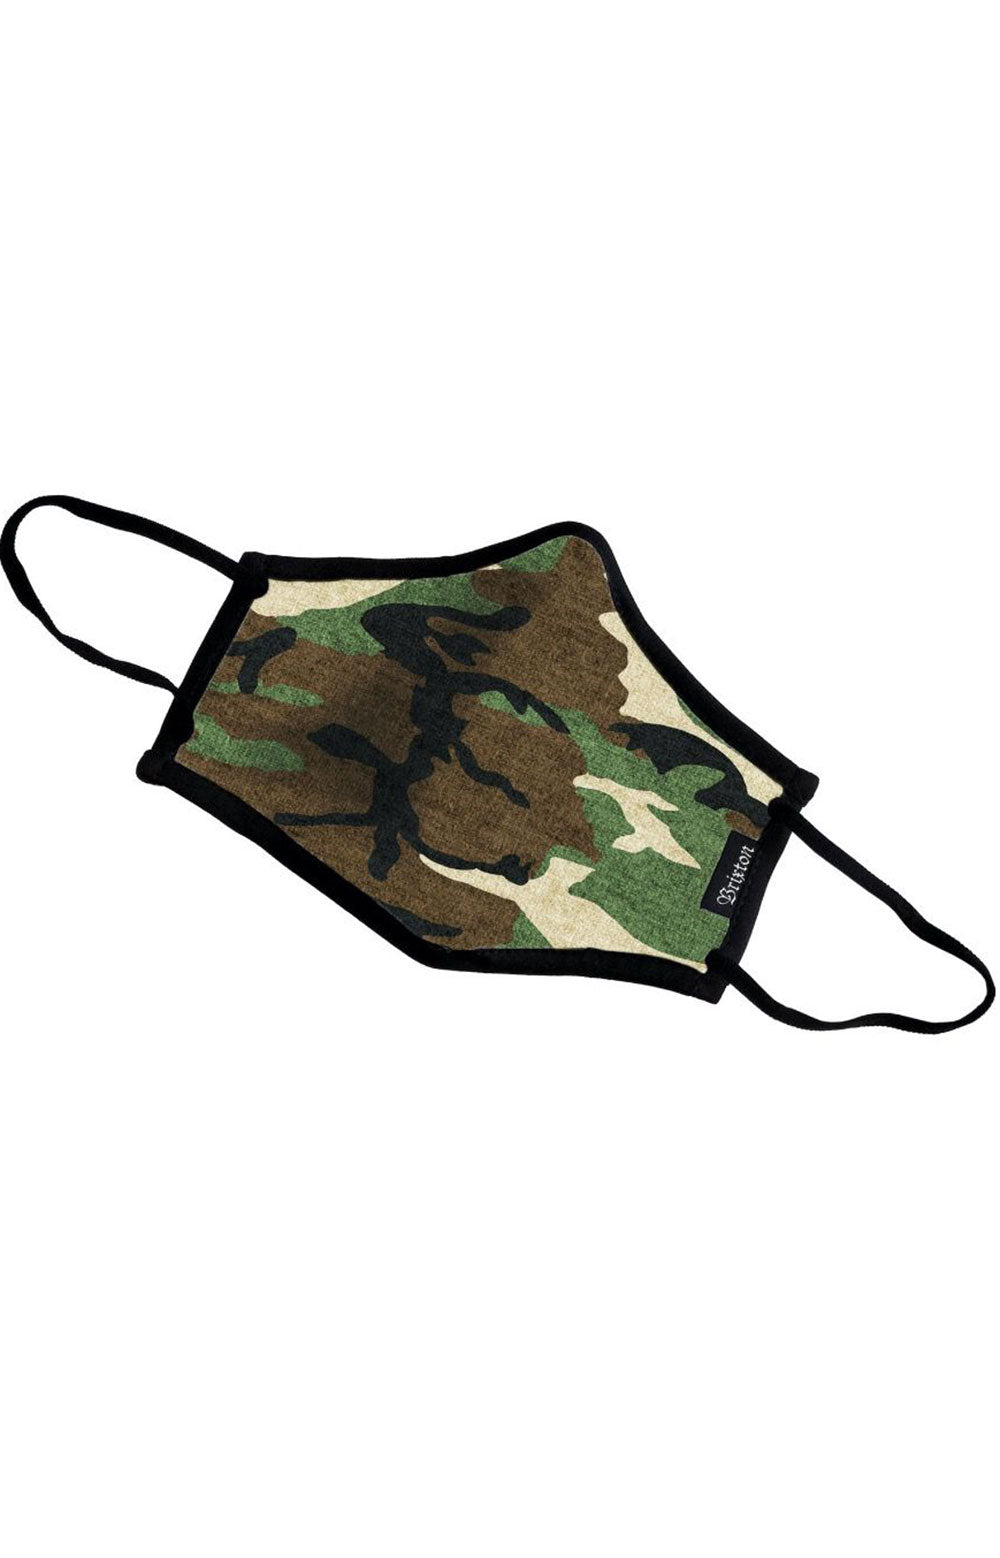 Youth Antimicrobial Face Mask - Camo